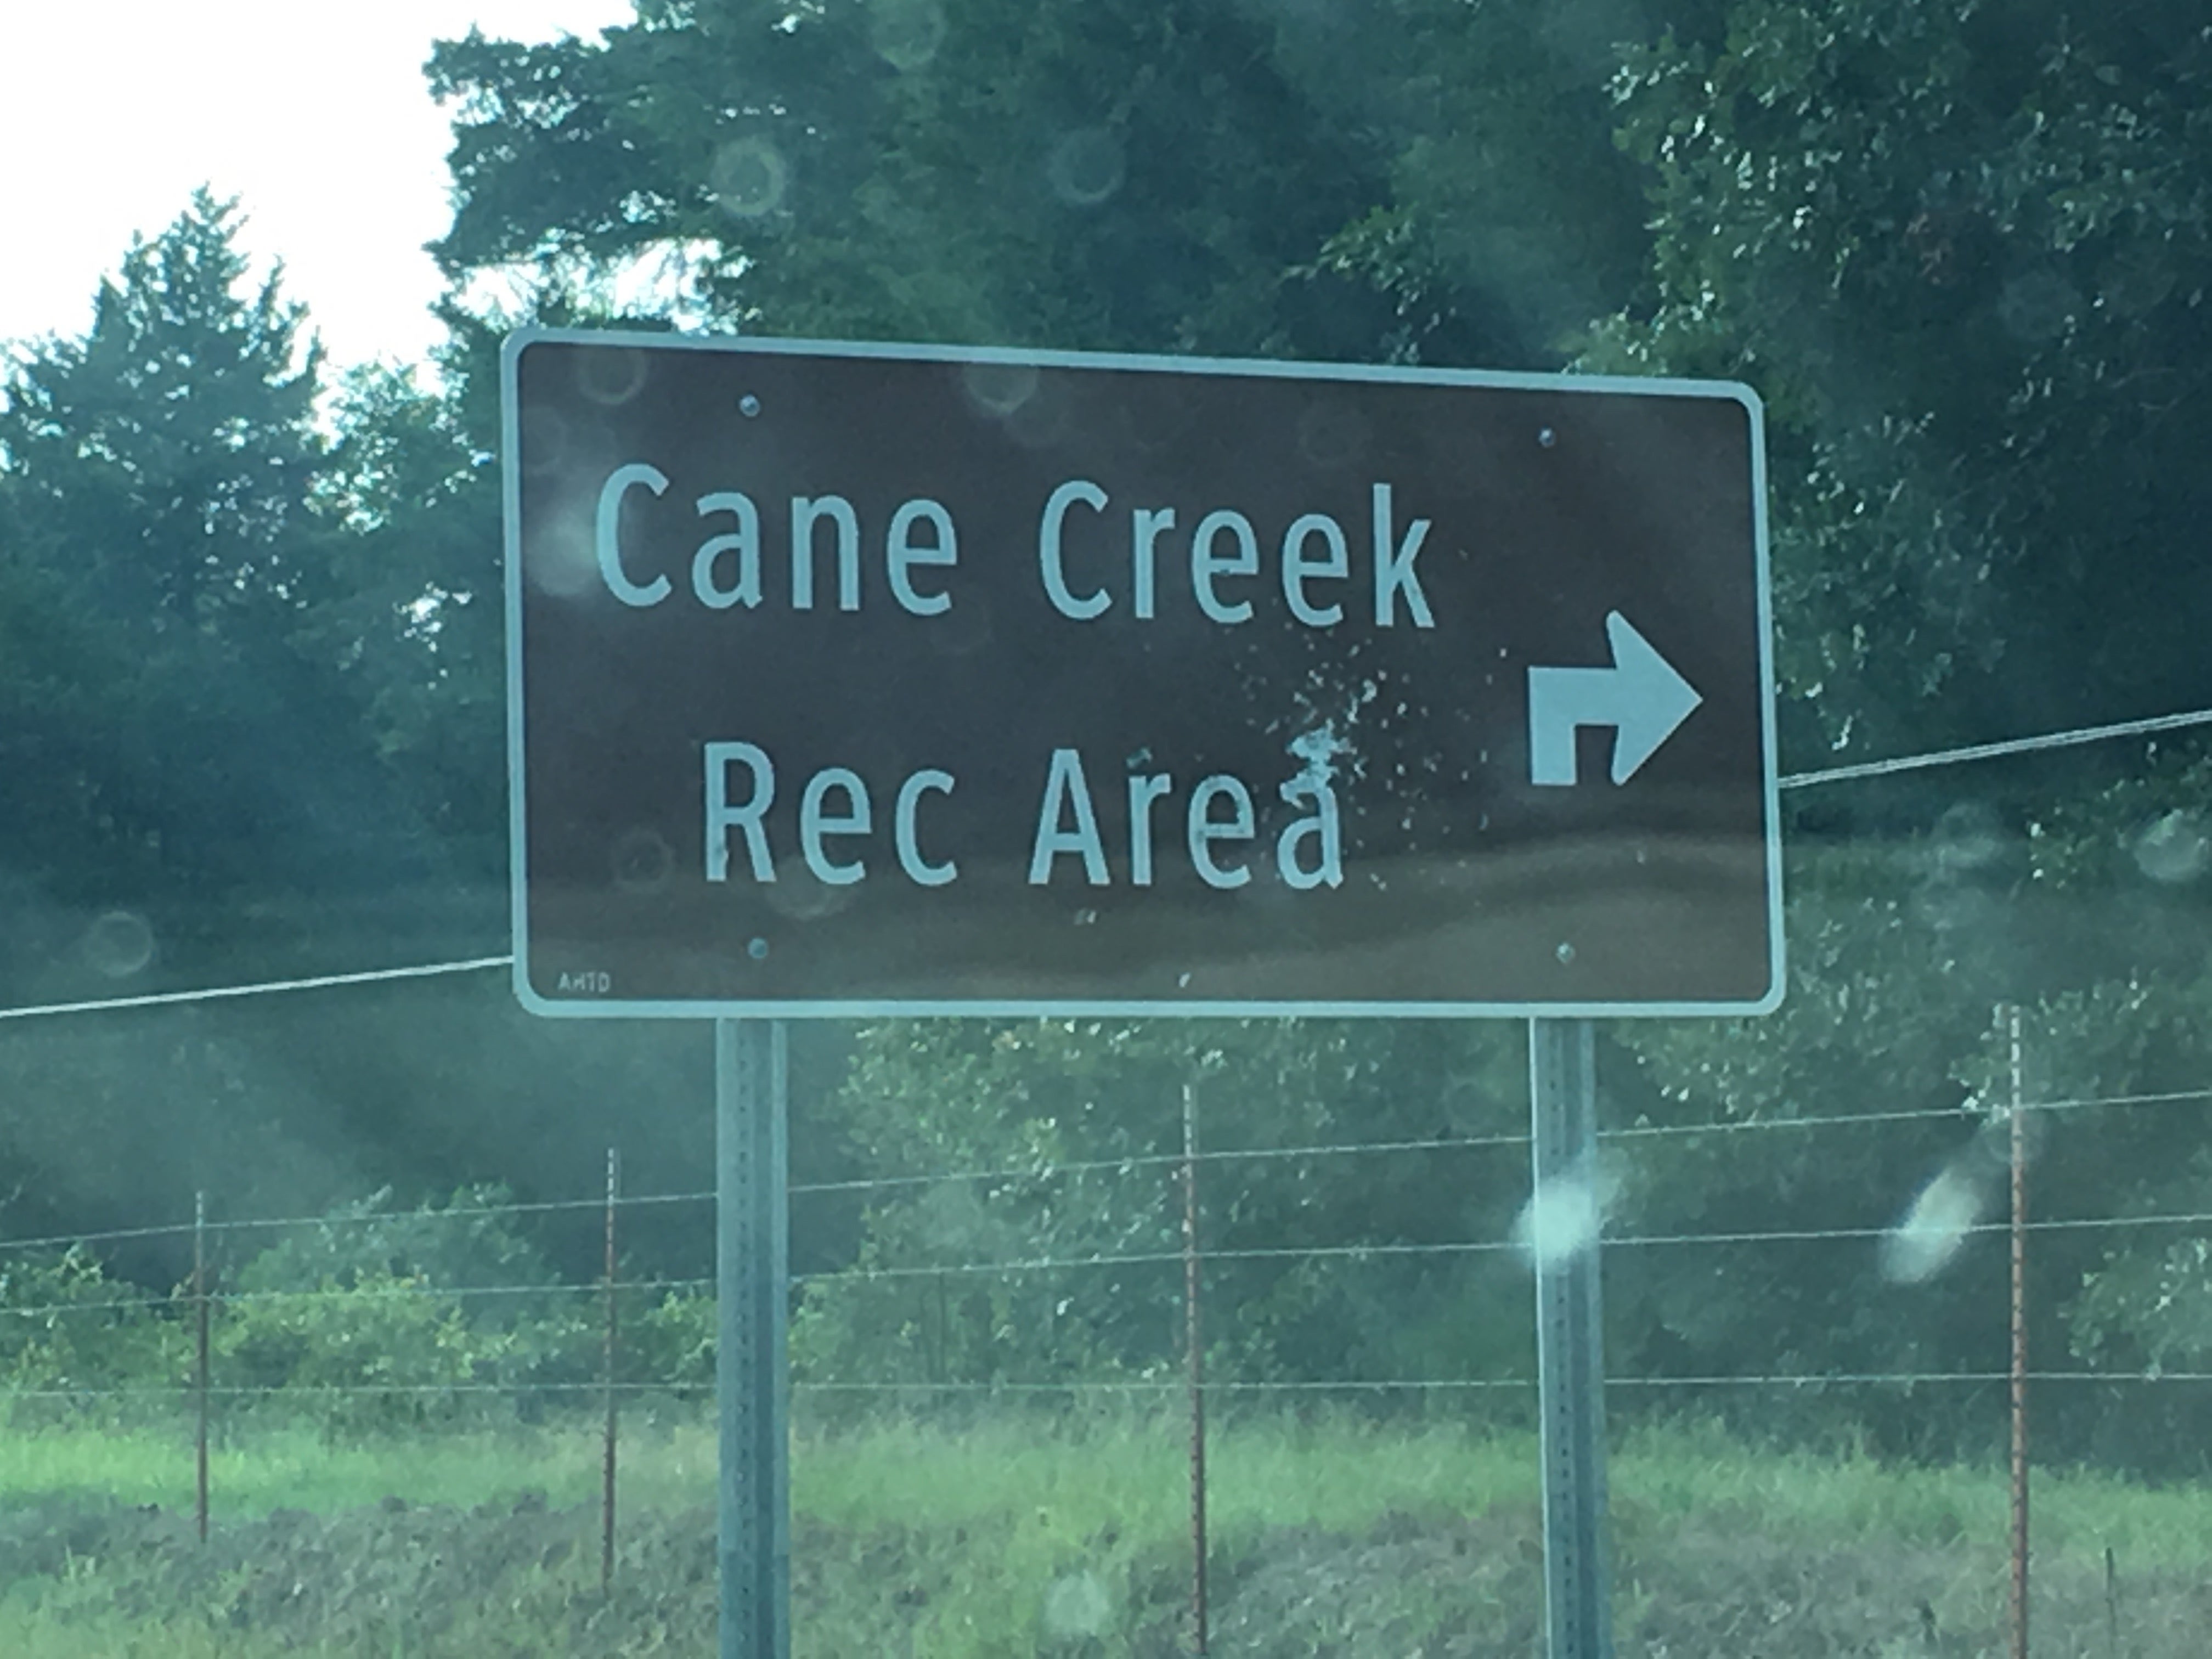 Camper submitted image from Cane Creek - 3